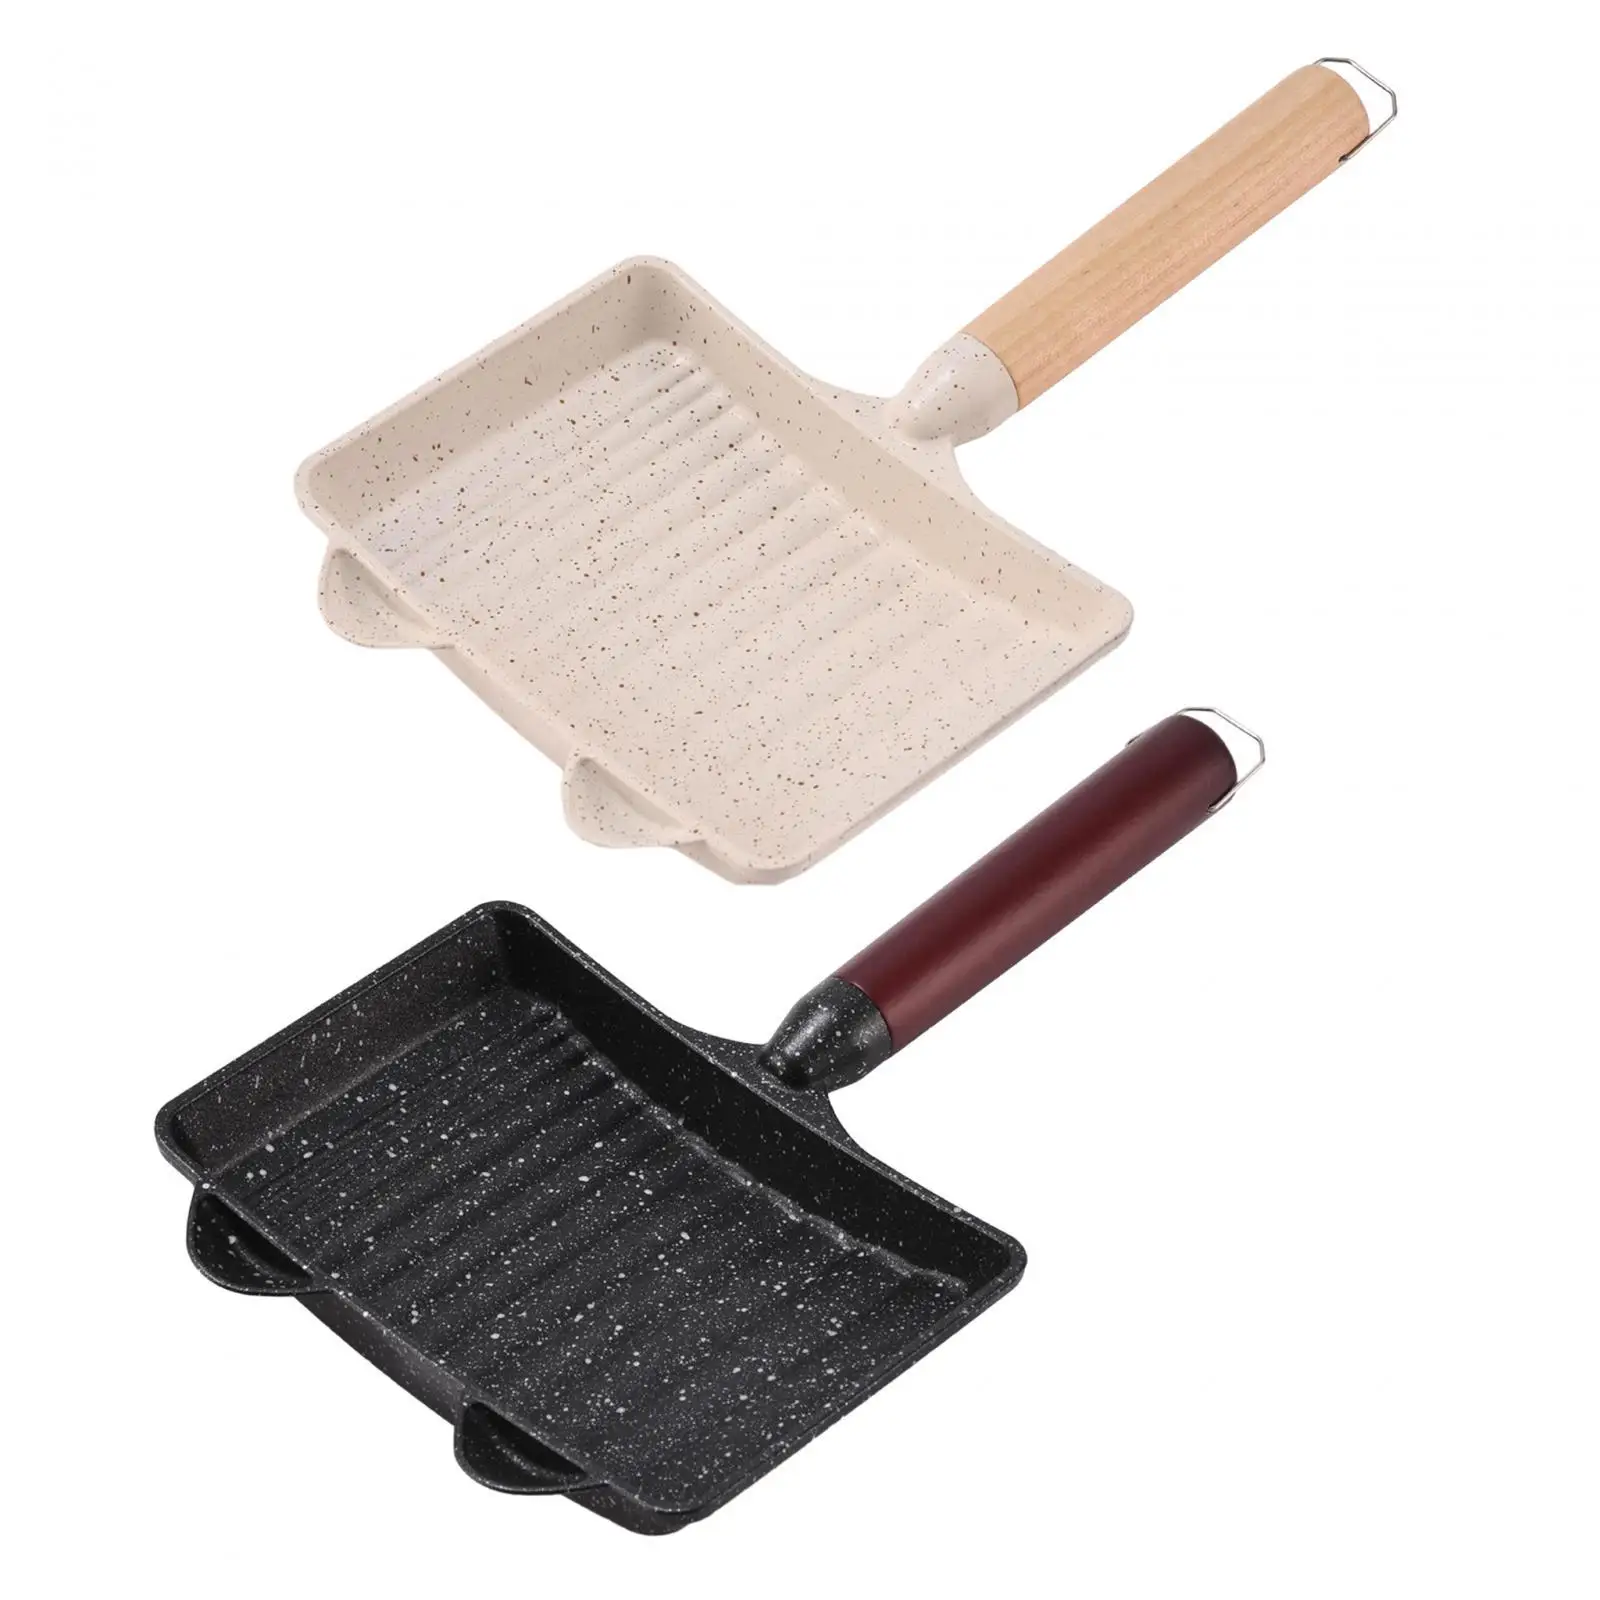 Frying Pan Portable Cooking Supplies Nonstick Pancakes Pans Kitchen Utensils for Camping Party Picnic Household Restaurant